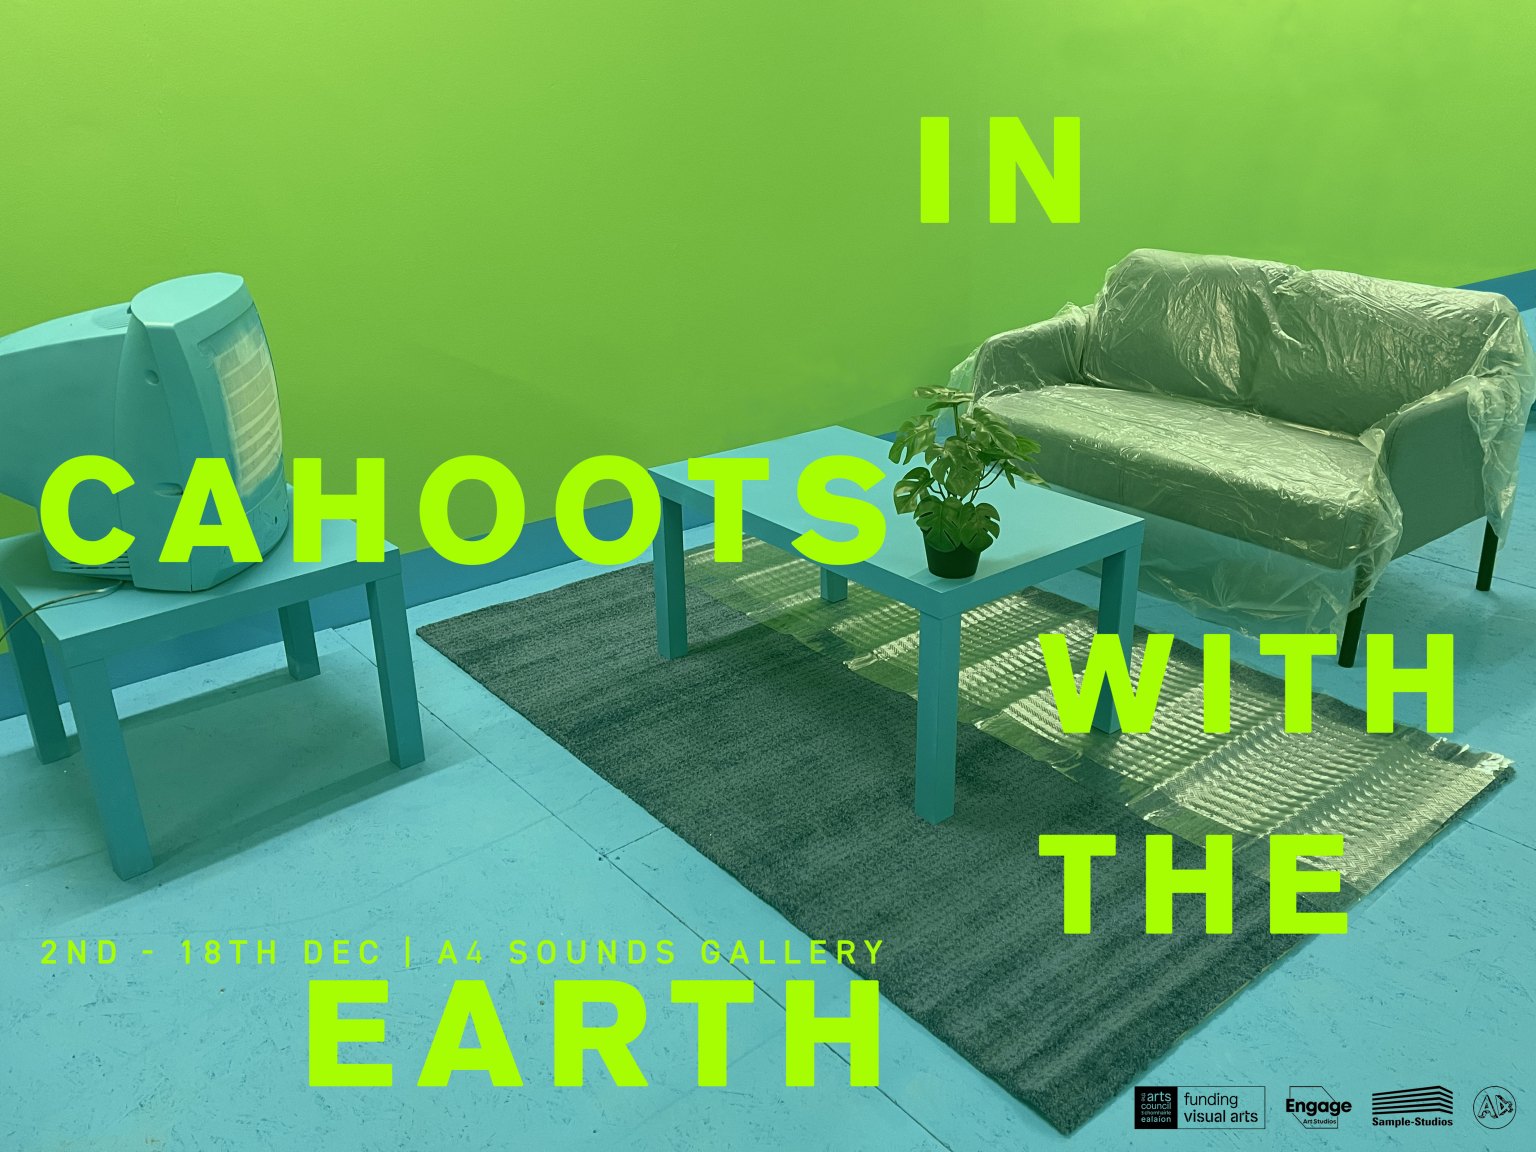 IN CAHOOTS WITH THE EARTH | Thursday 2 December – Saturday 18 / Friday 31 December | A4 Sounds Gallery